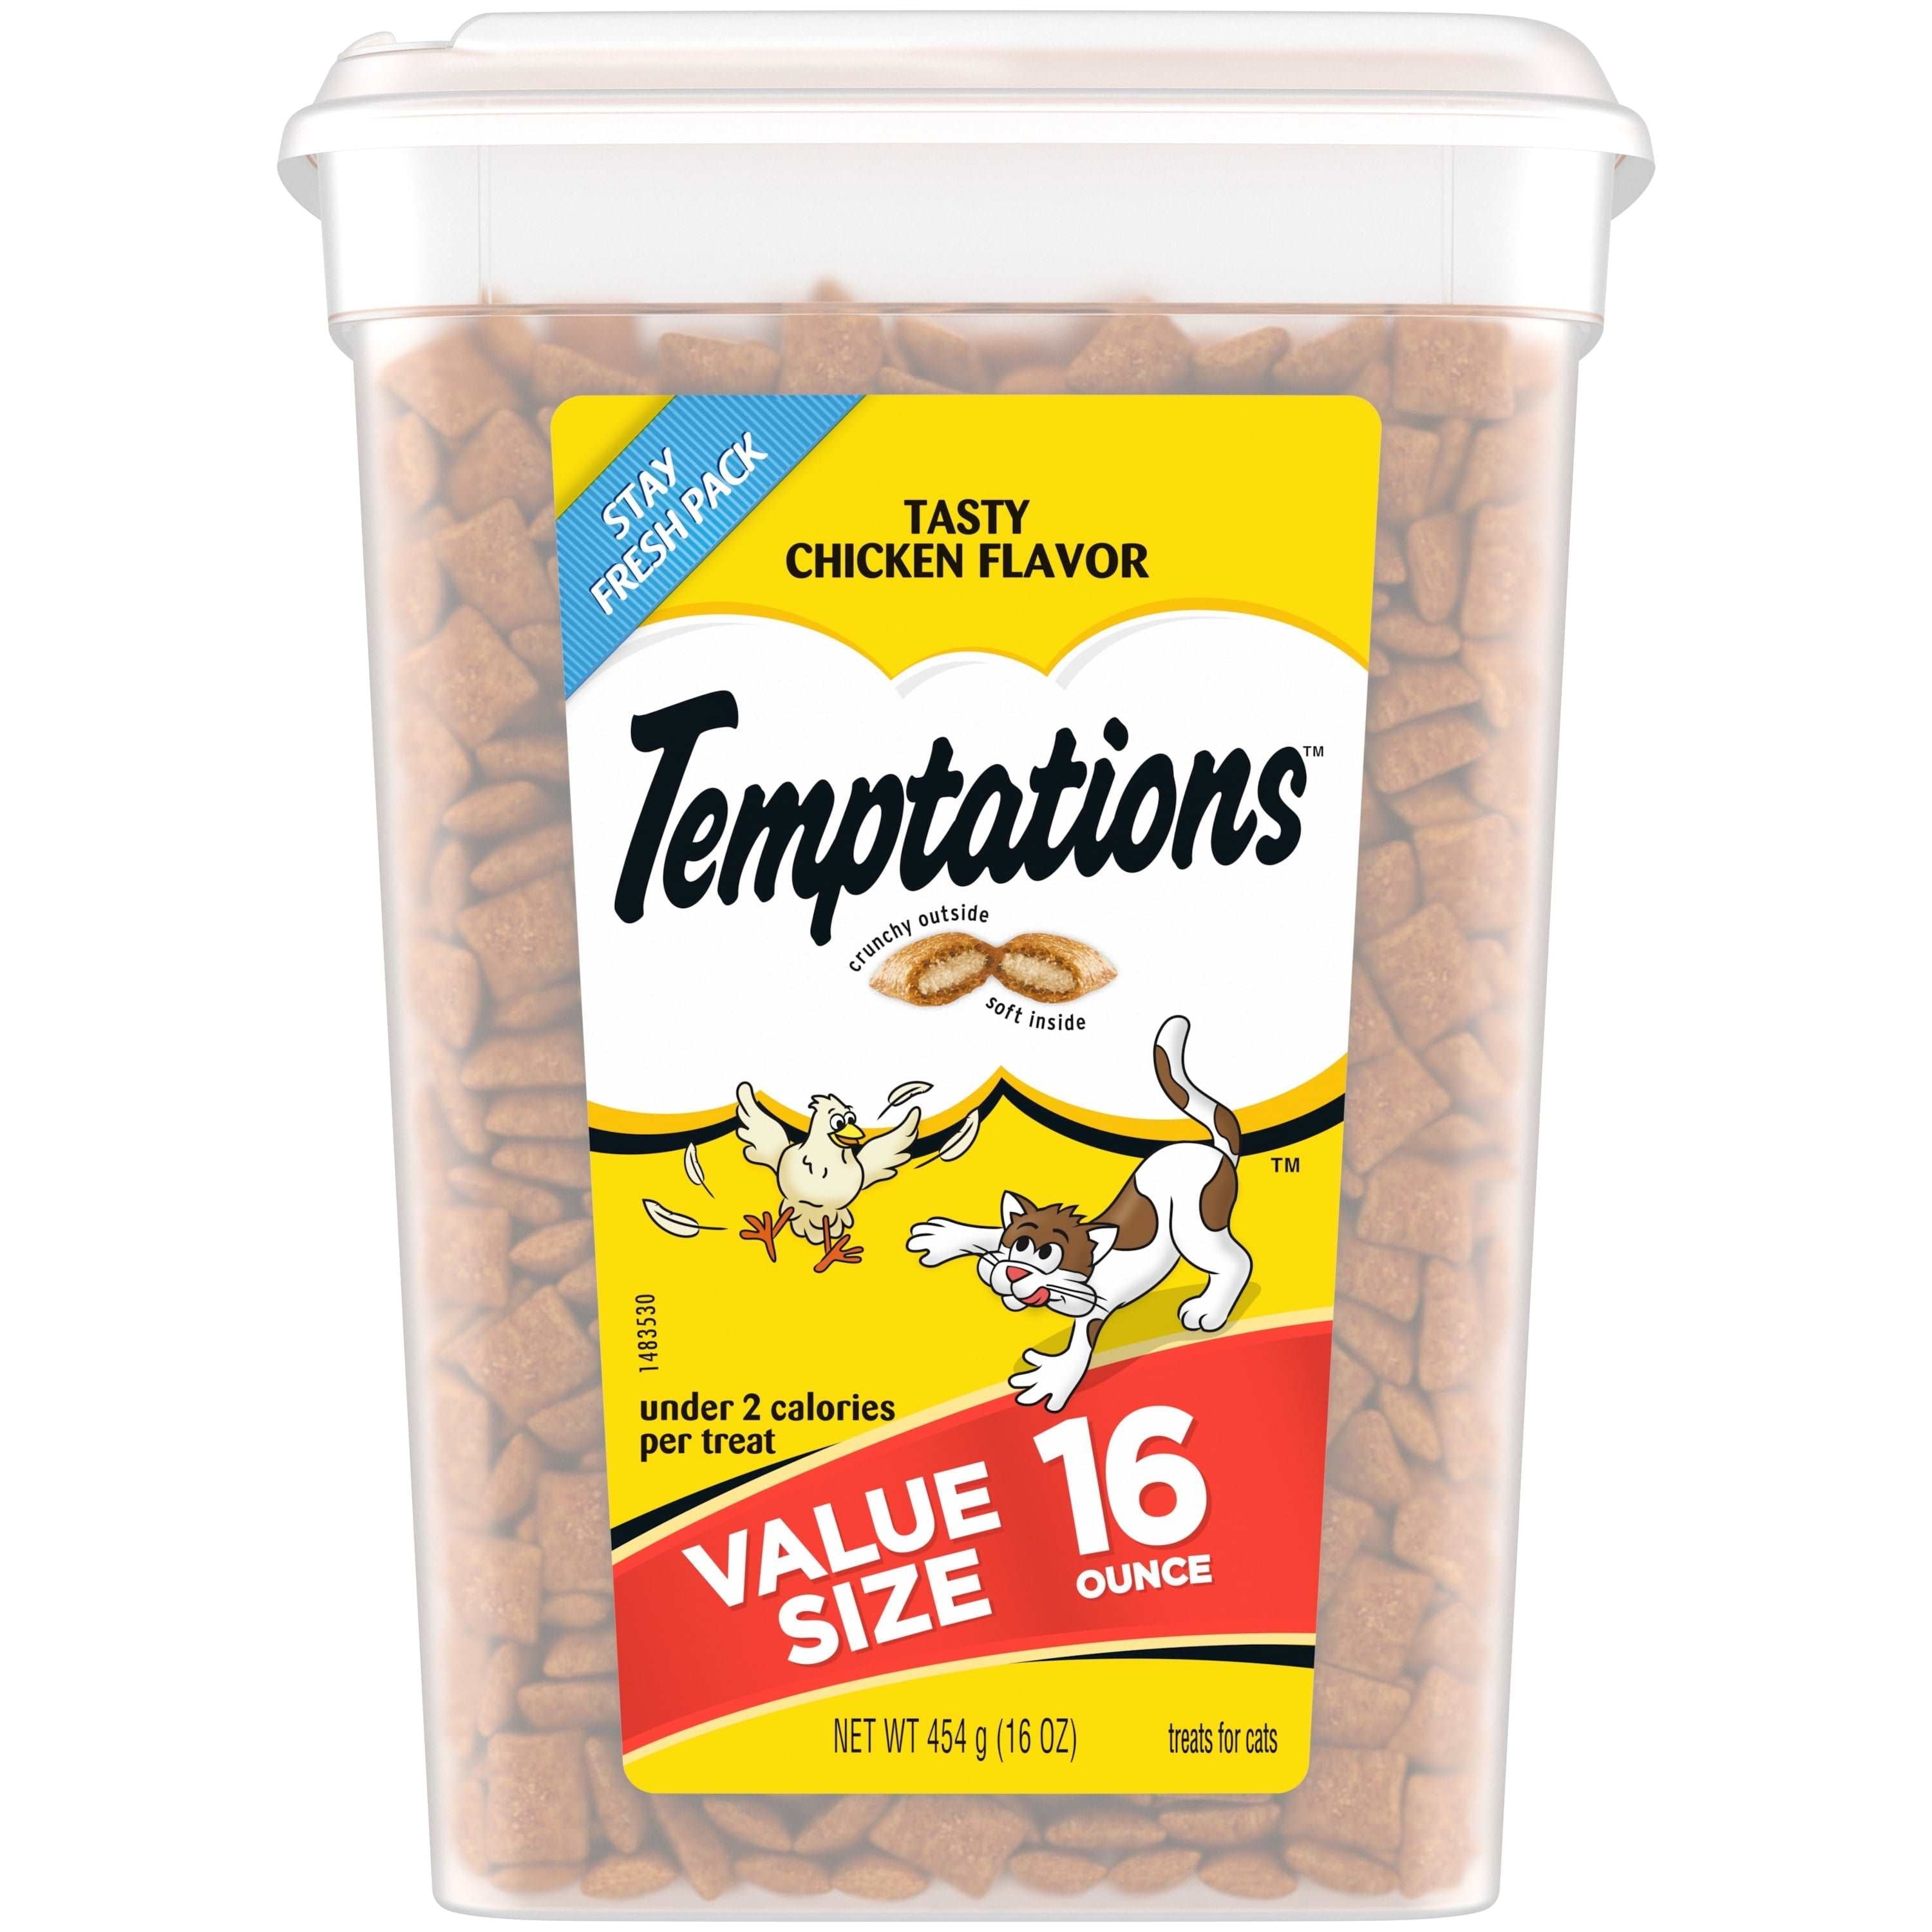 Wholesale prices with free shipping all over United States Bundle: Temptations Tasty Chicken Flavor 3.15 lb Dry Cat Food & 16oz Classic Crunchy and Soft Cat Treats - Steven Deals